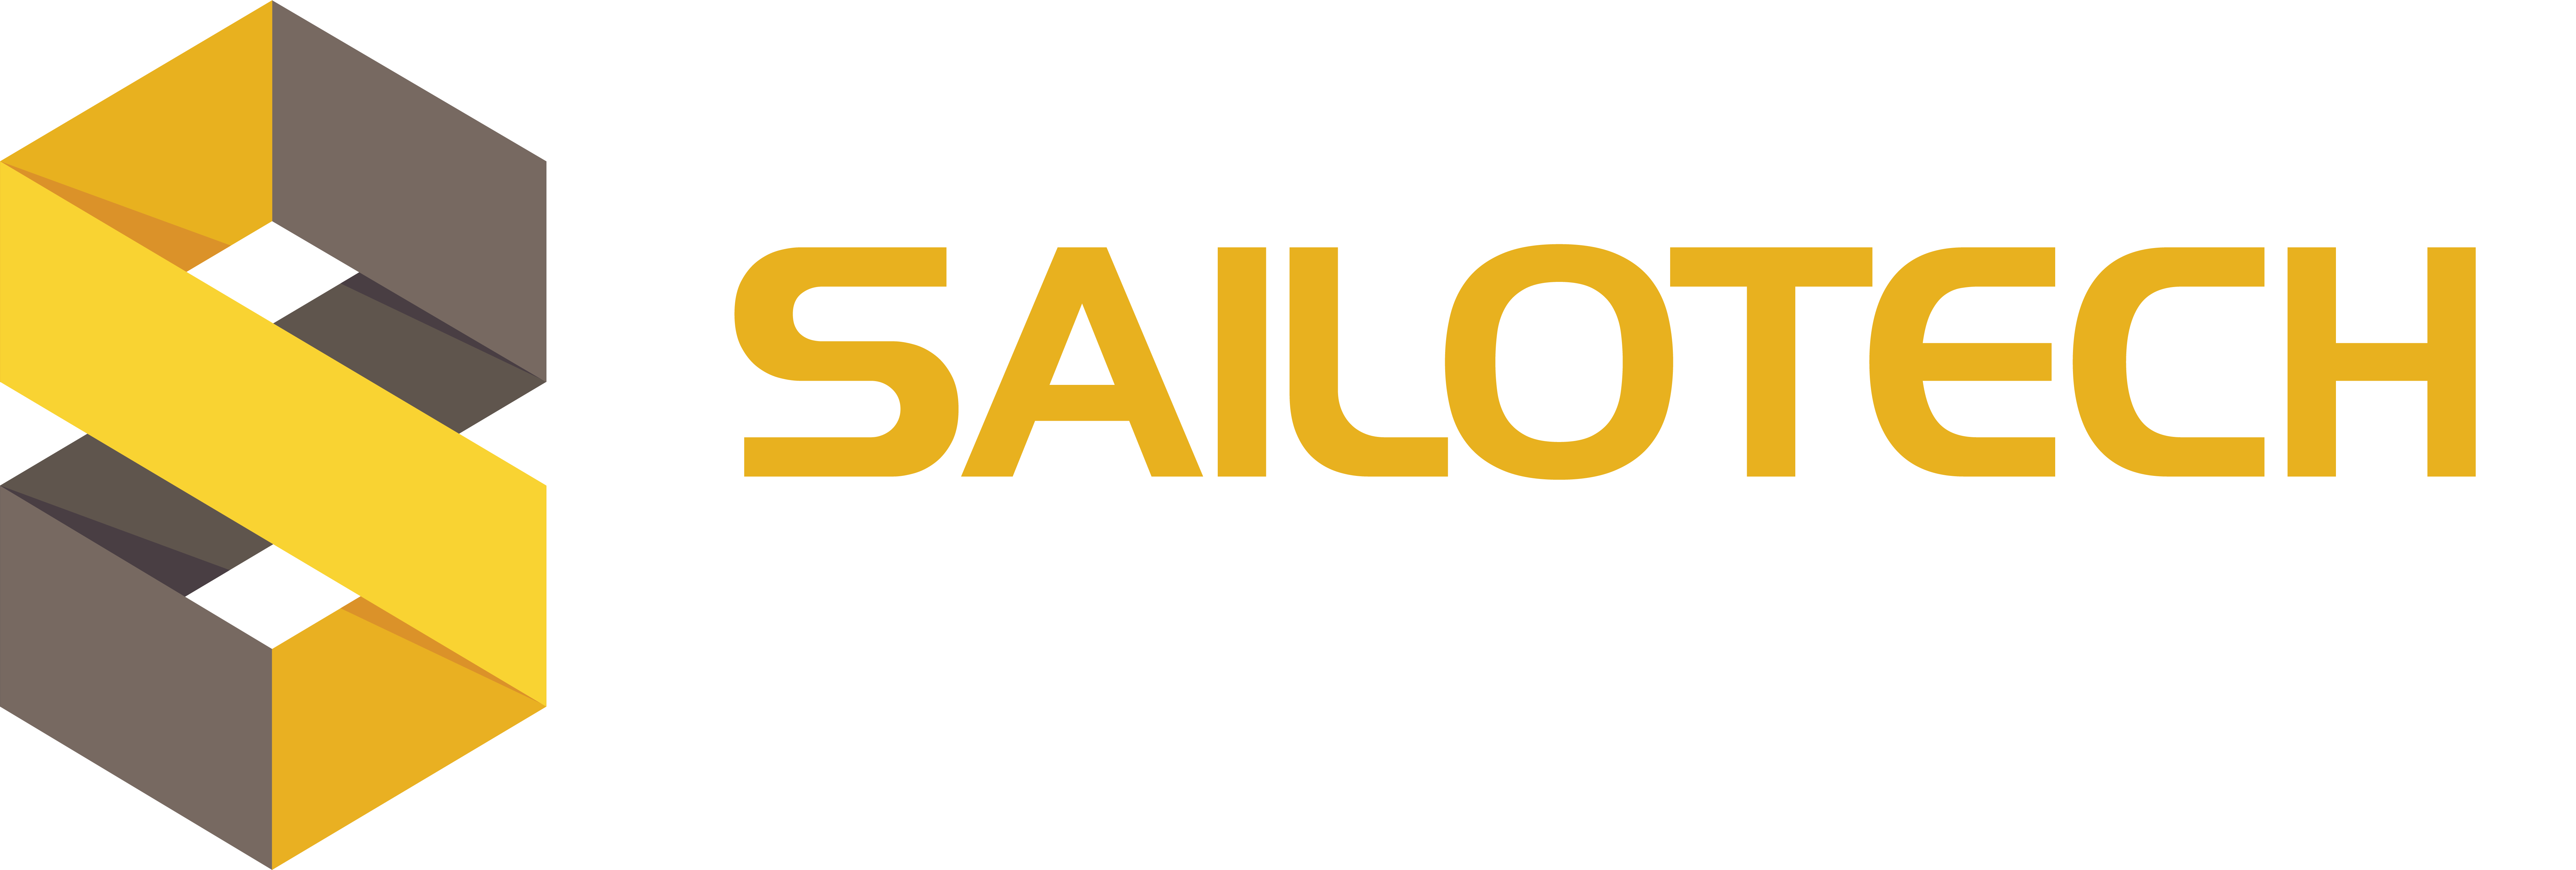 Logo of Sailotech Building Information Services In Reading, Berkshire